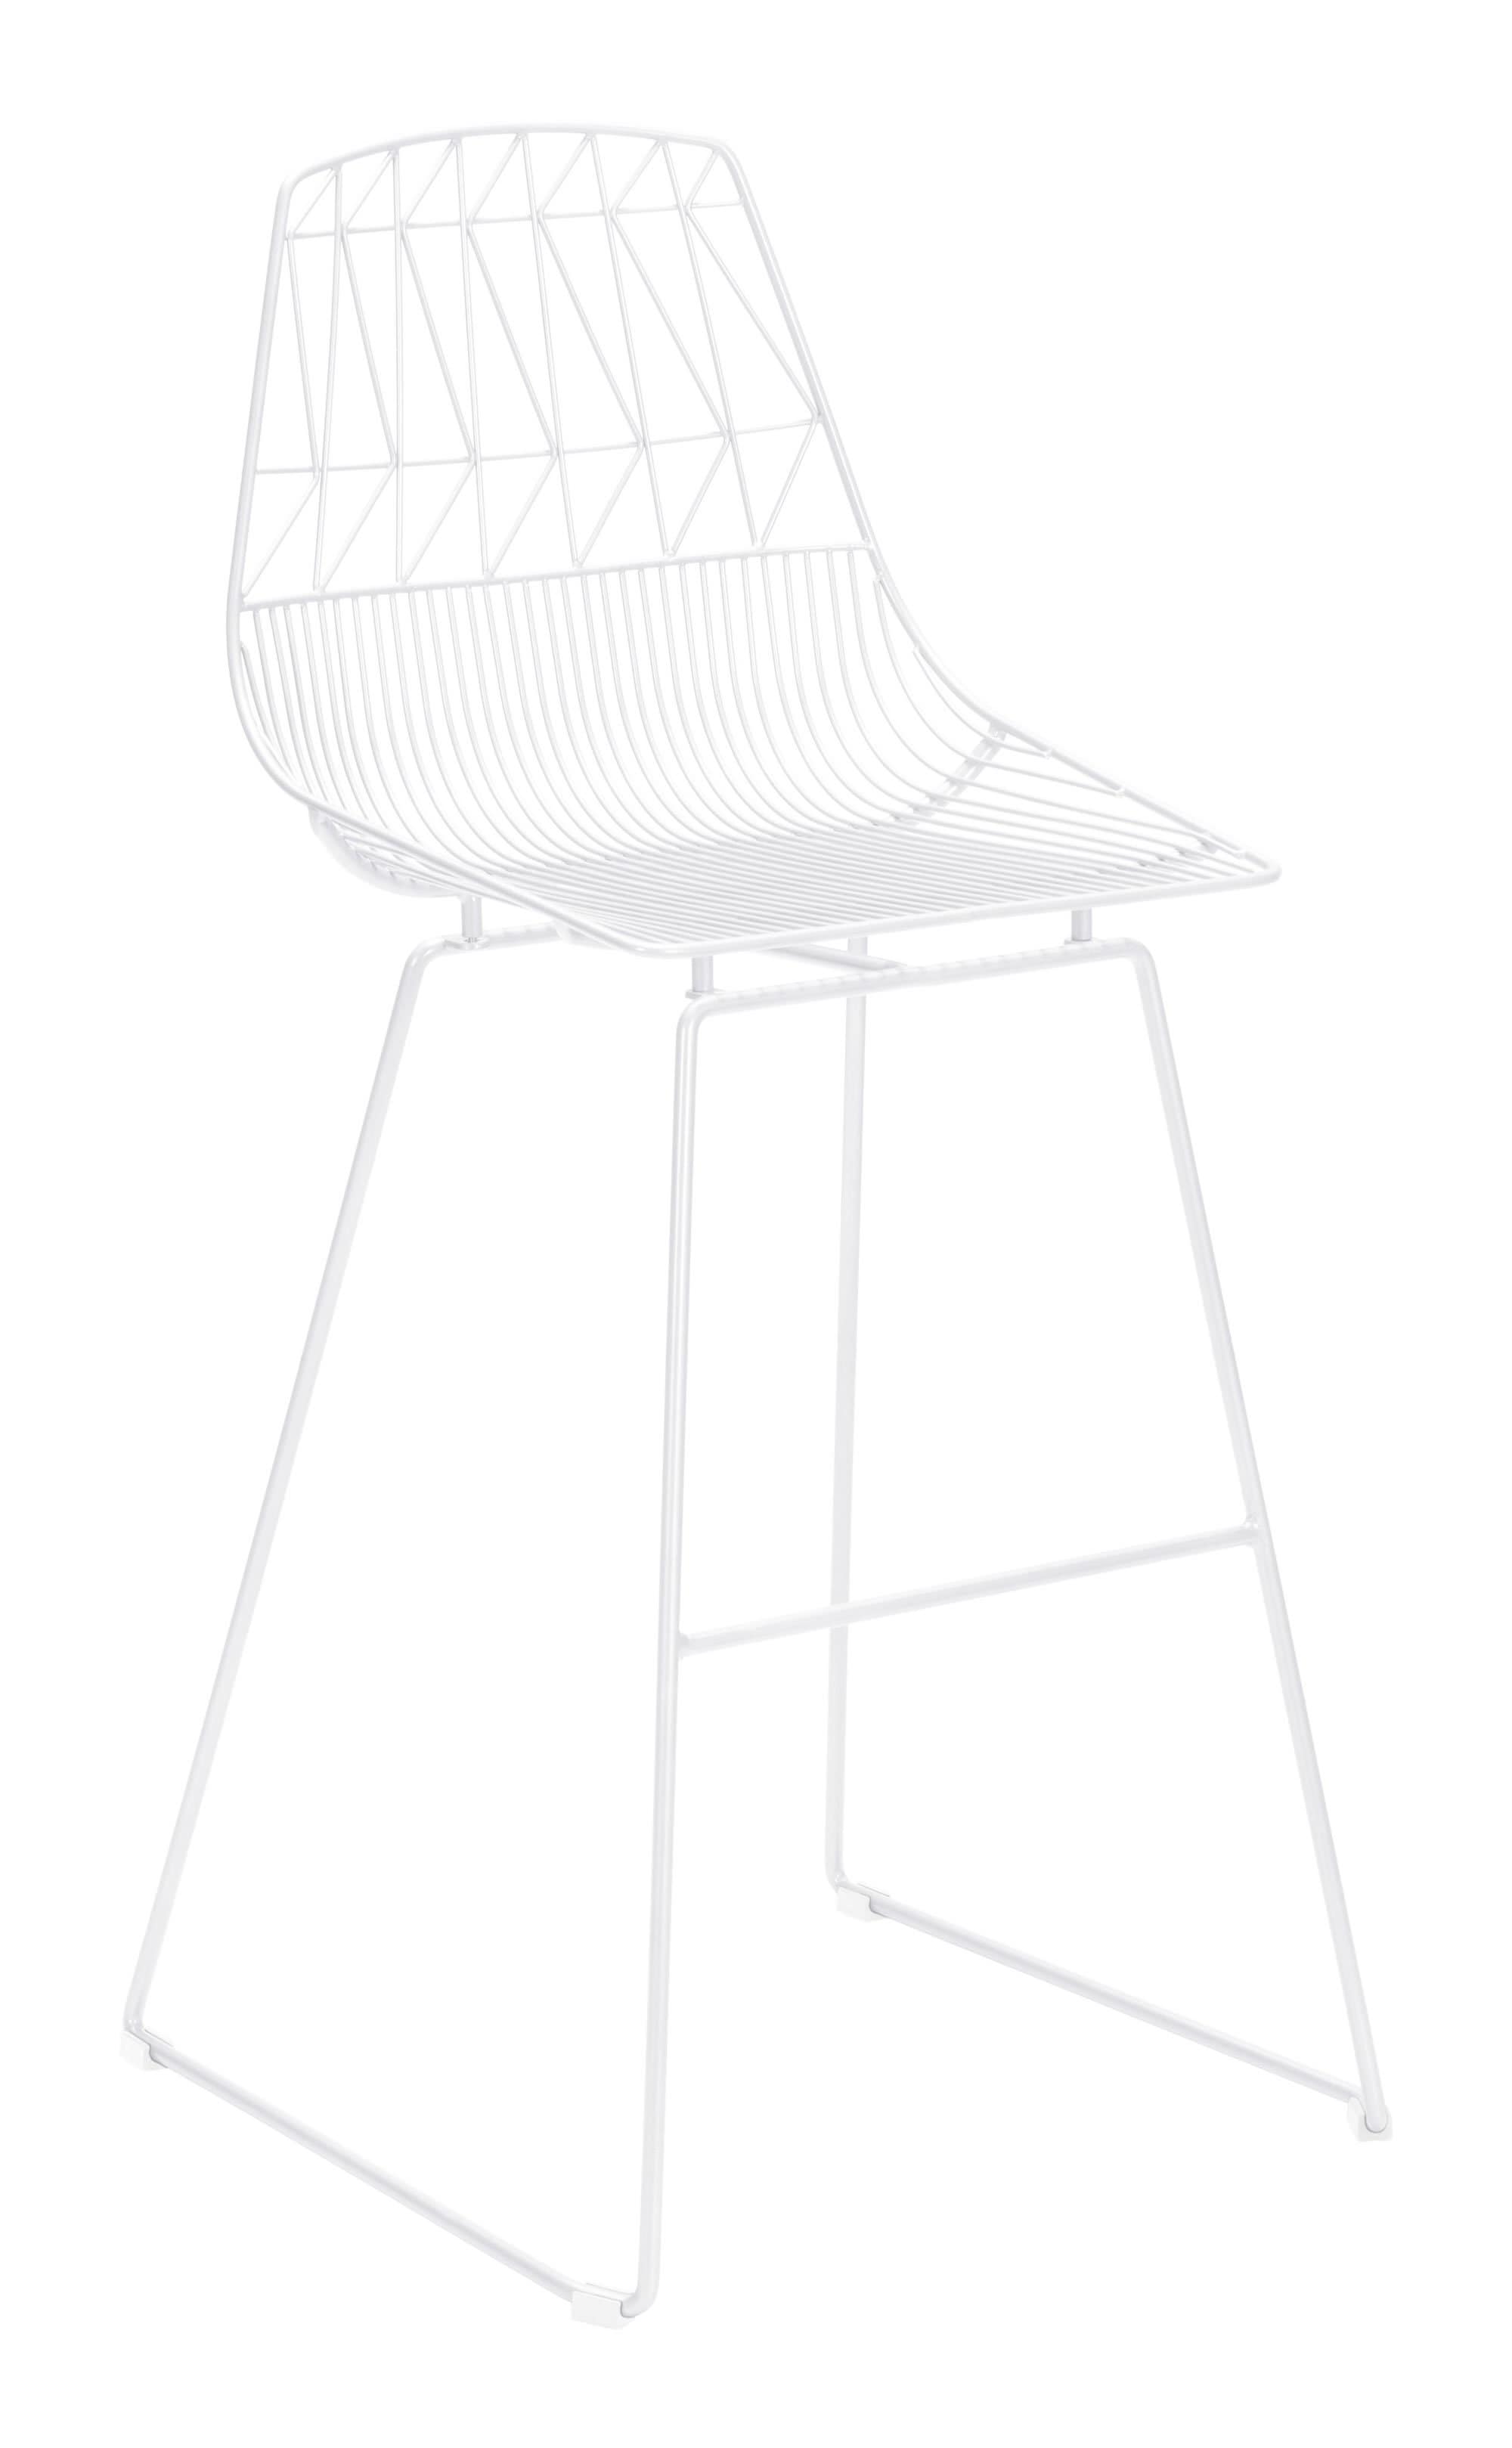 HomeRoots Outdoors Outdoor Chairs White / Steel 22" x 22" x 43.5" White, Steel, Bar Chair - Set of 2